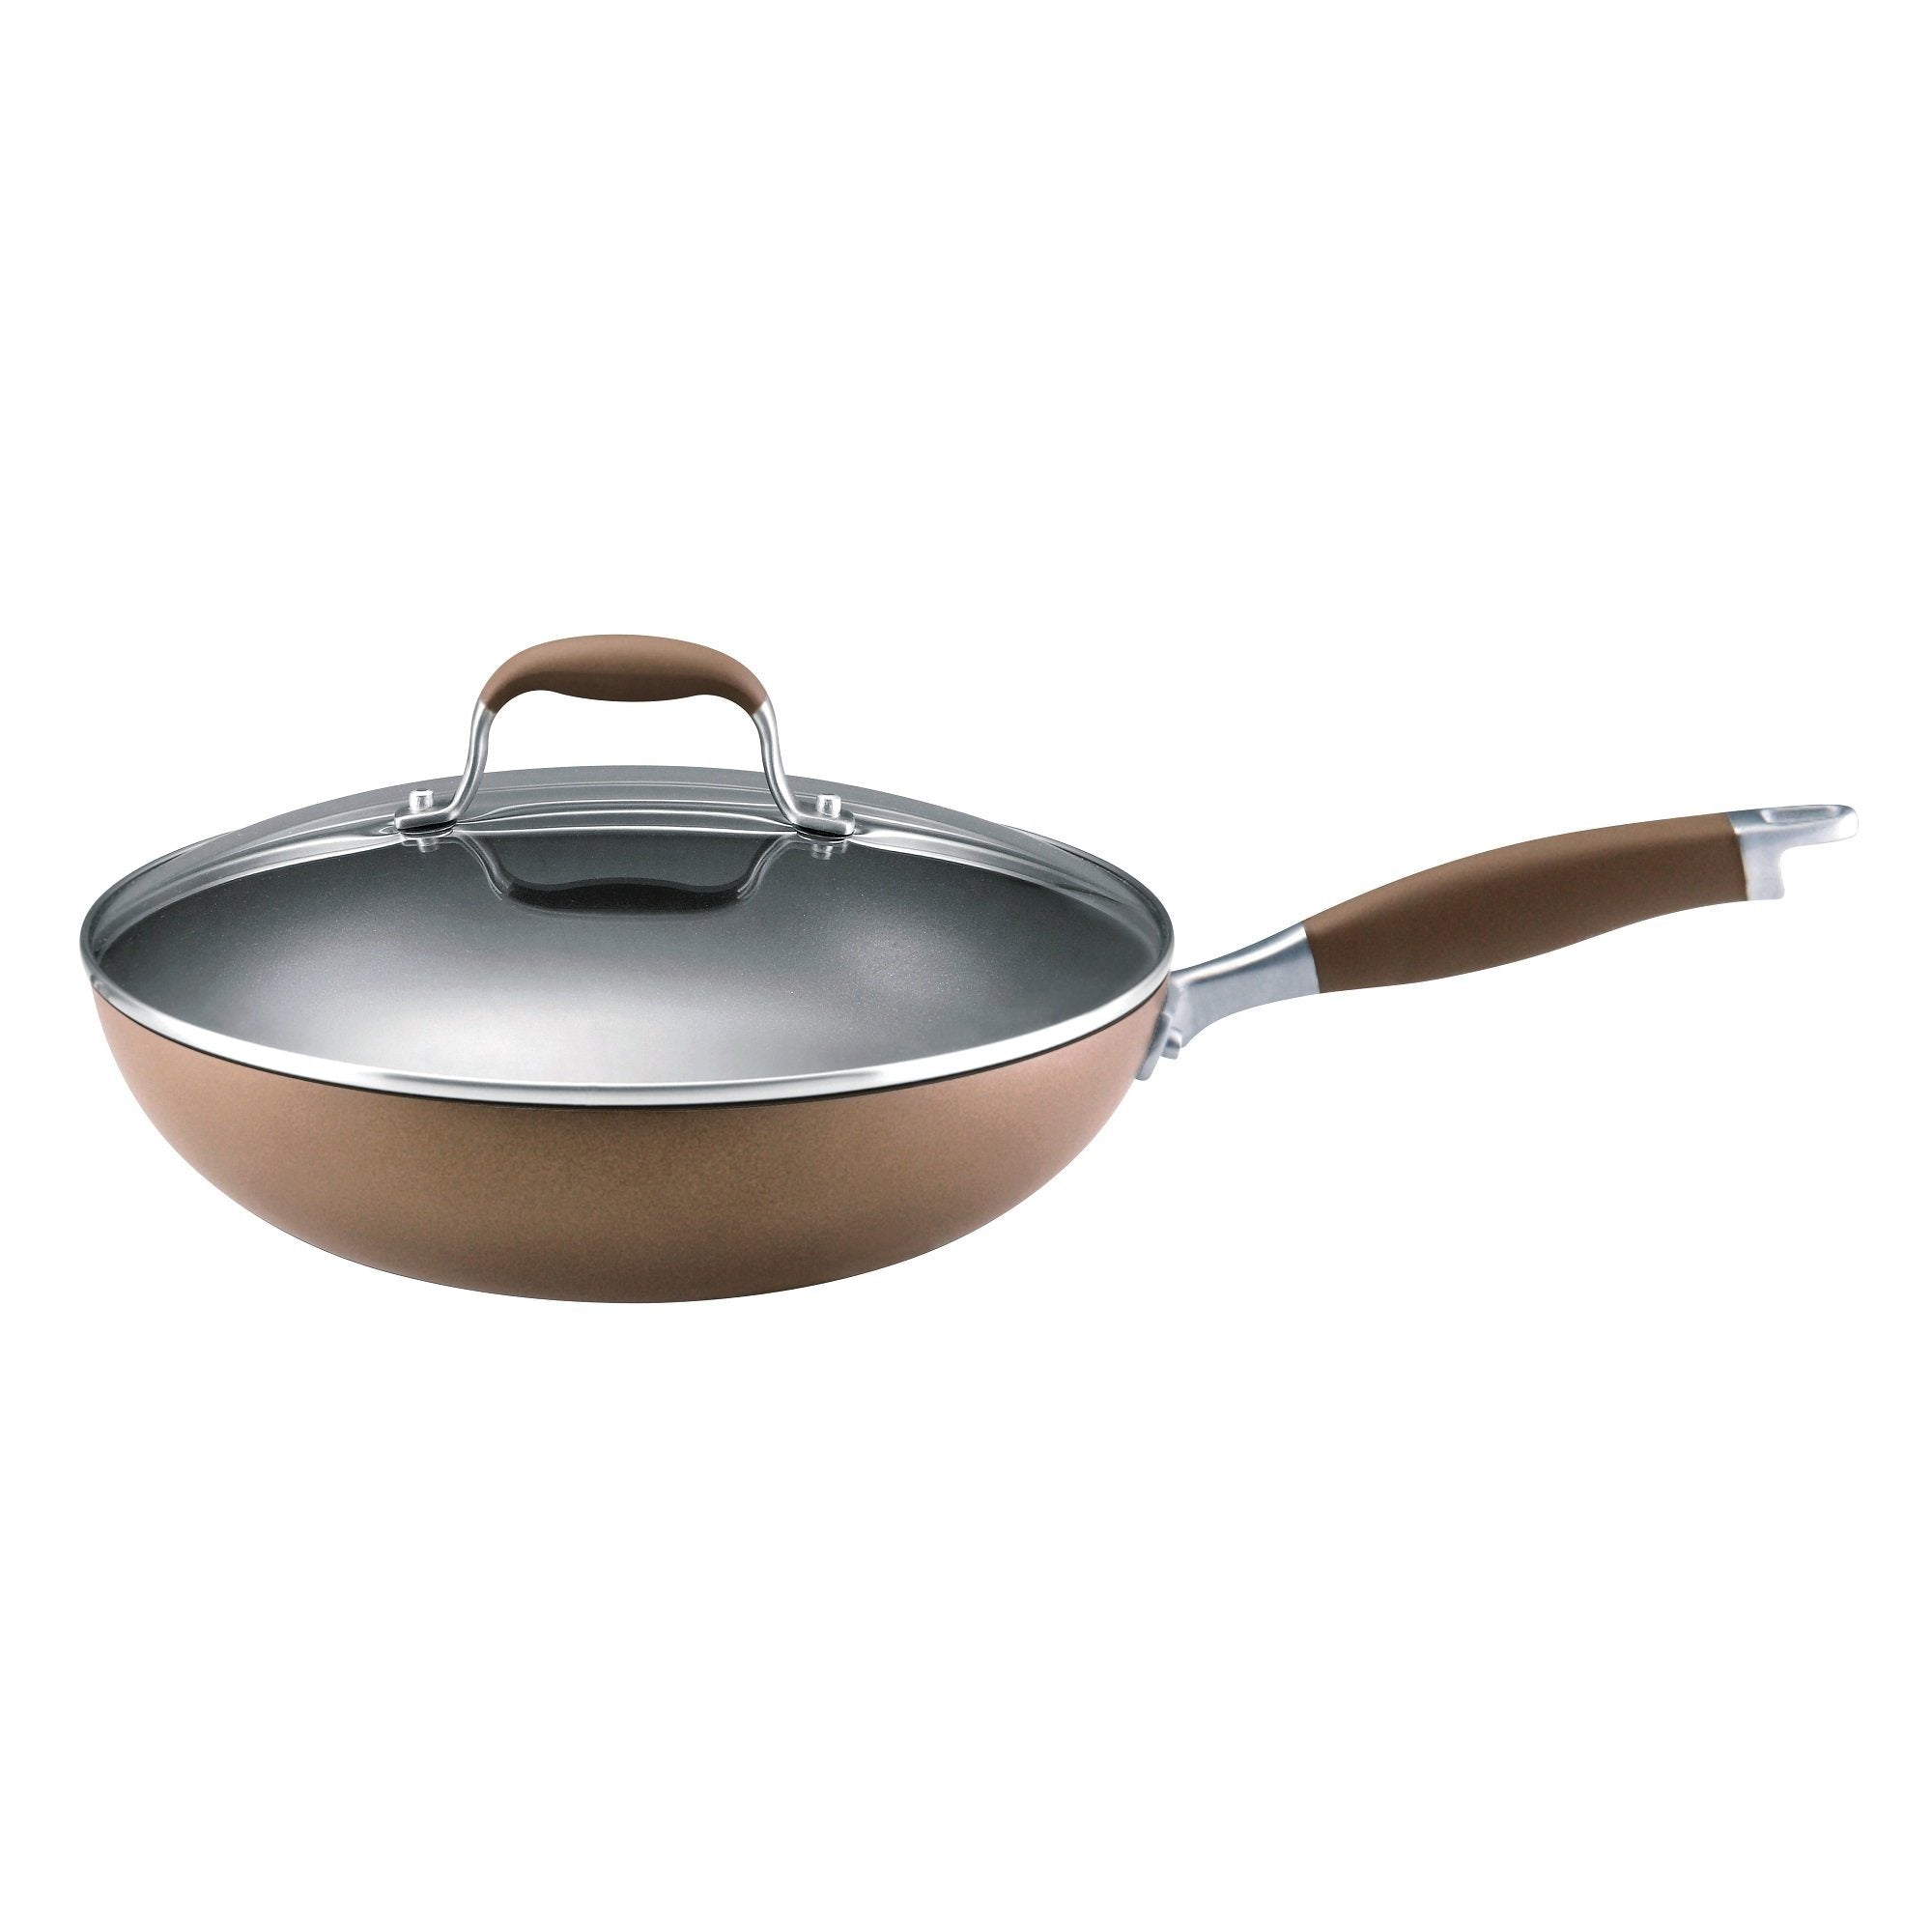 Anolon Advanced Hard Anodized 12 Ultimate Pan – Meyer Canada